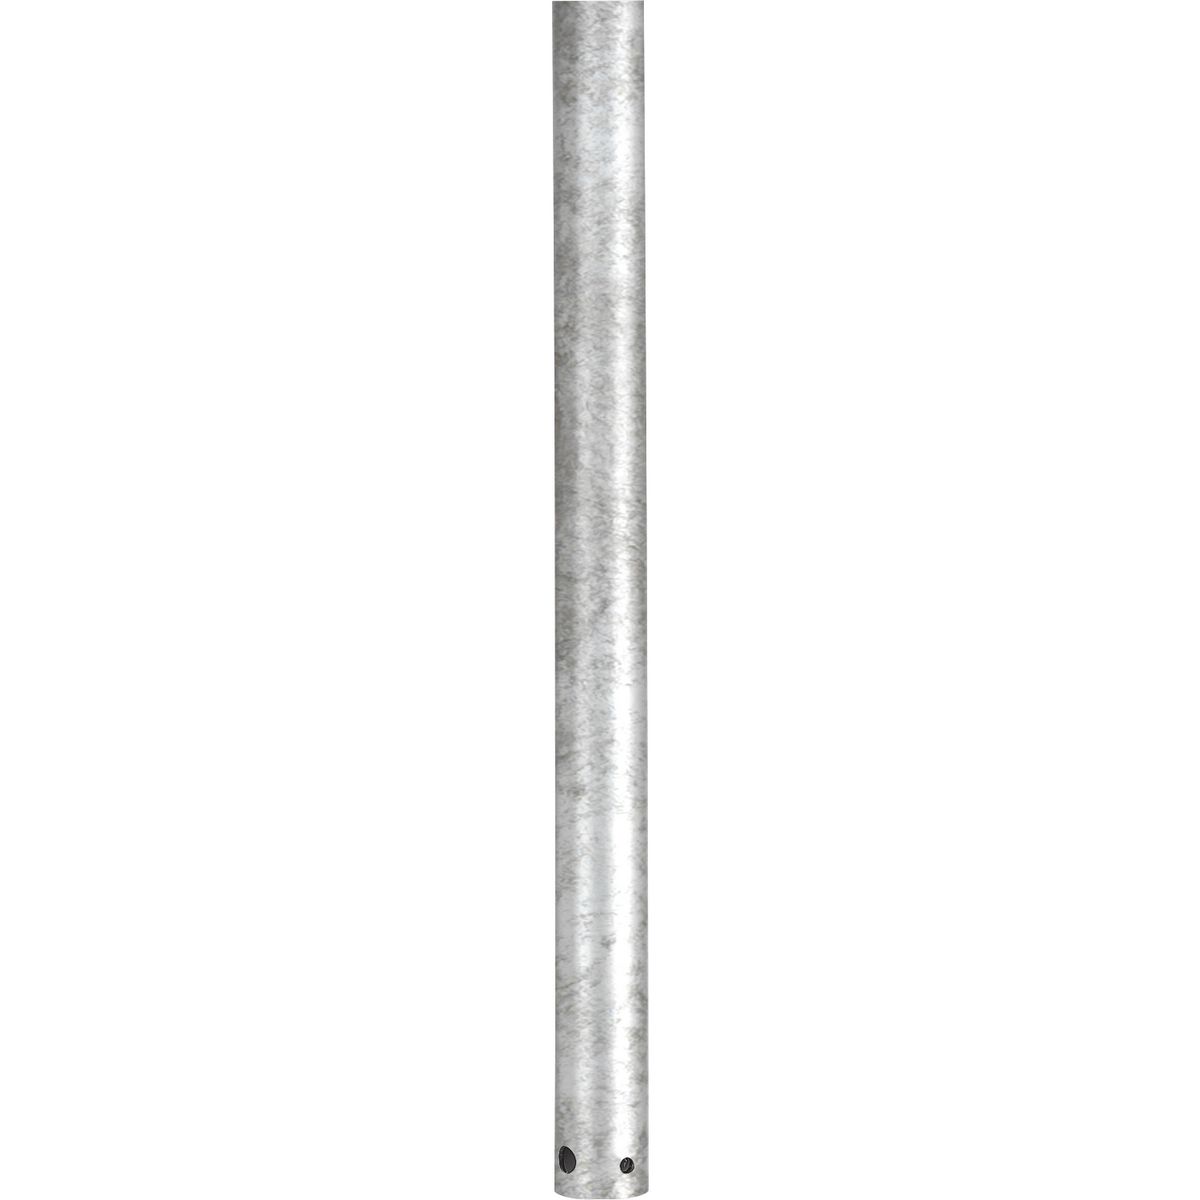 3/4 In. x 36 In. downrod for use with any Progress Lighting ceiling fan. Use of a fan downrod positions your ceiling fan at the optimal height for air circulation and provides the perfect solution for installation on high cathedral ceilings or in great rooms. Refer to the selection guide for recommended downrod lengths based upon your ceiling height. Galvanized Finish.